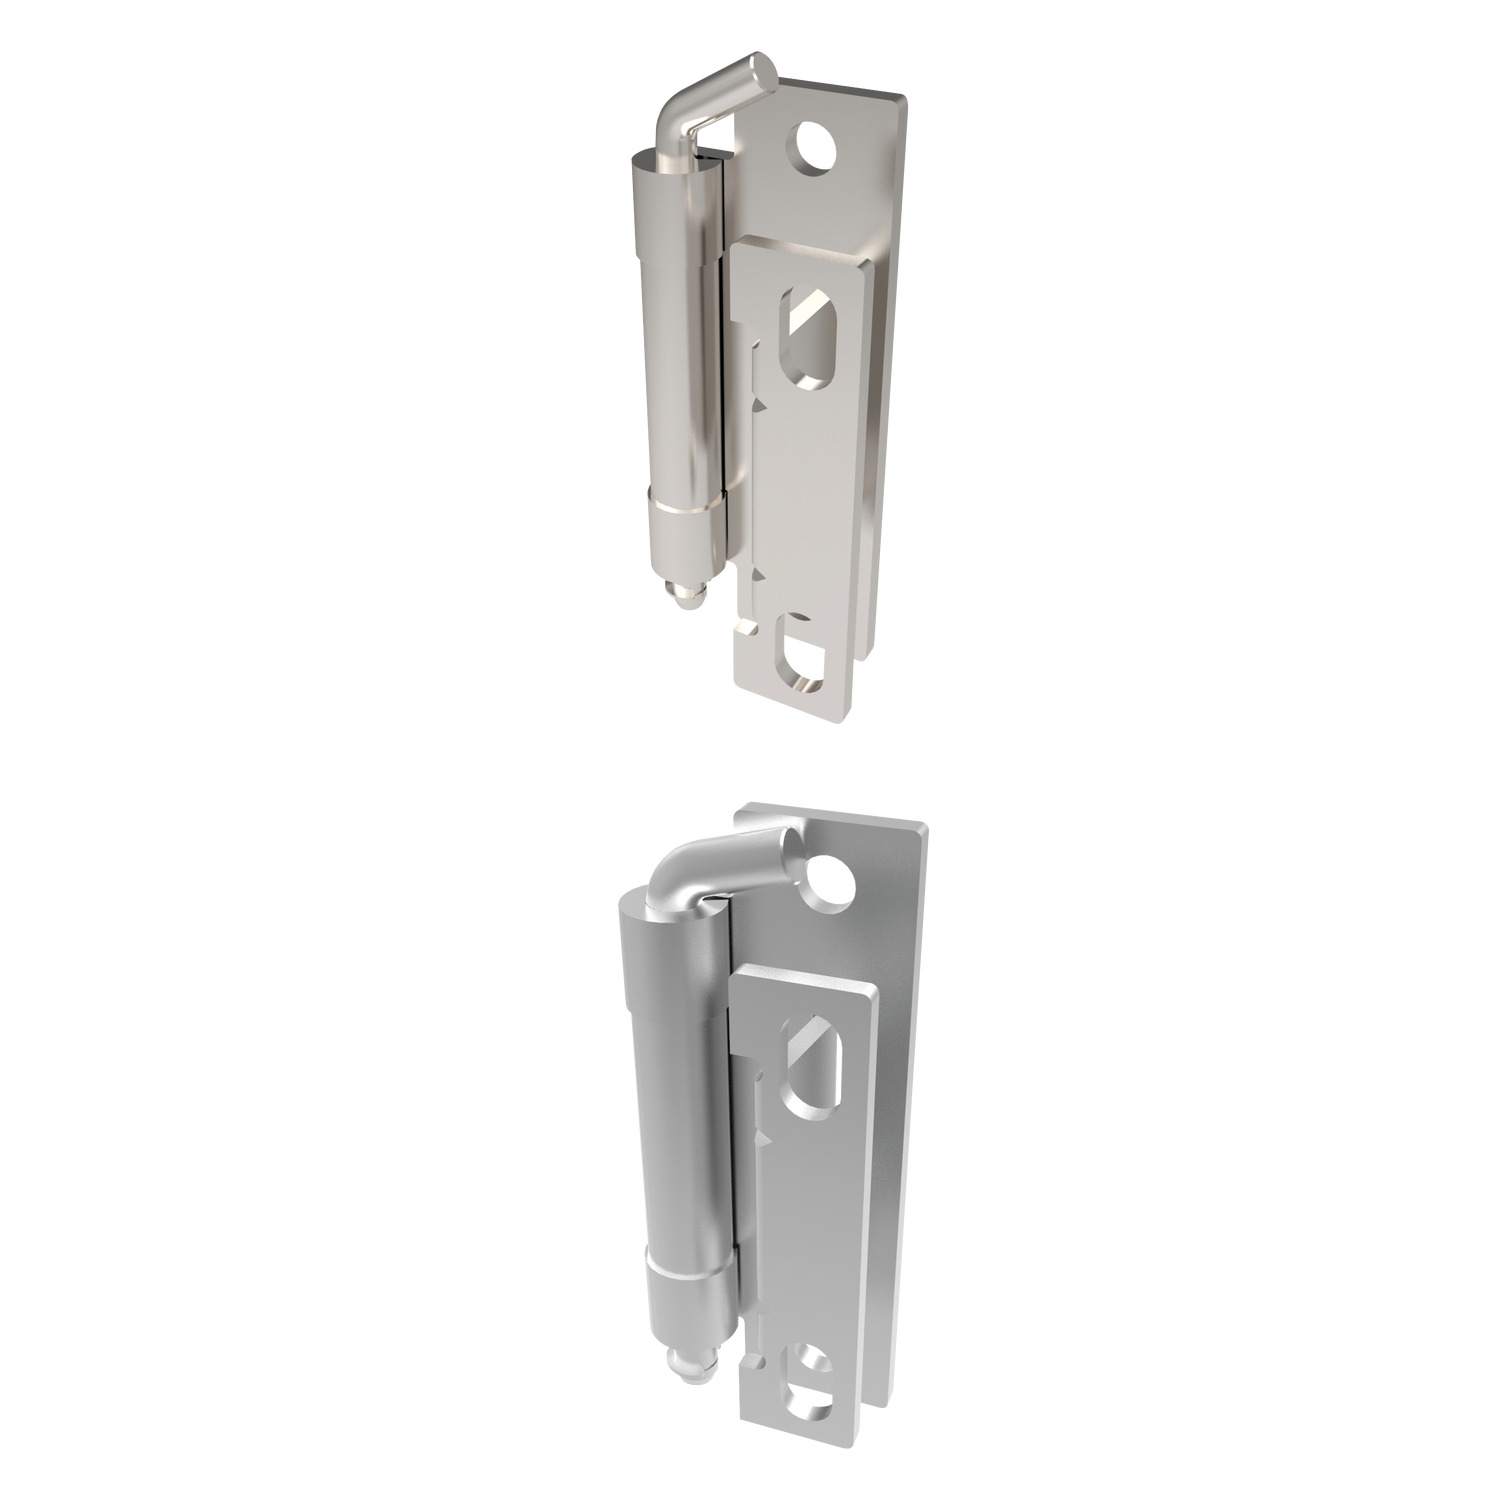 S2125 - Concealed Pivot Hinges - Lift Off